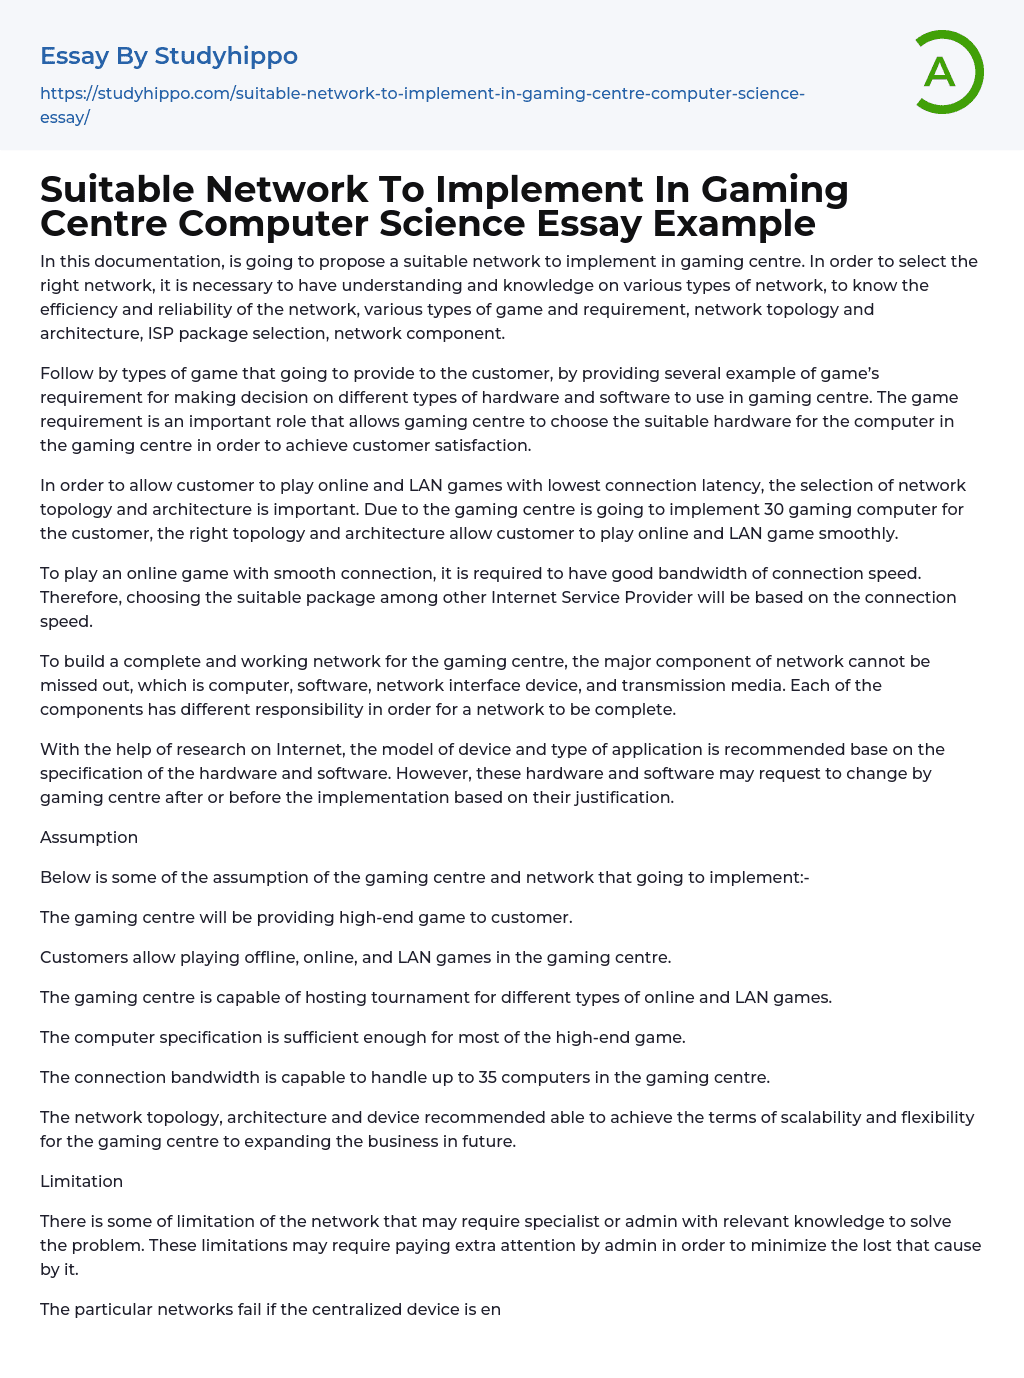 Suitable Network To Implement In Gaming Centre Computer Science Essay Example